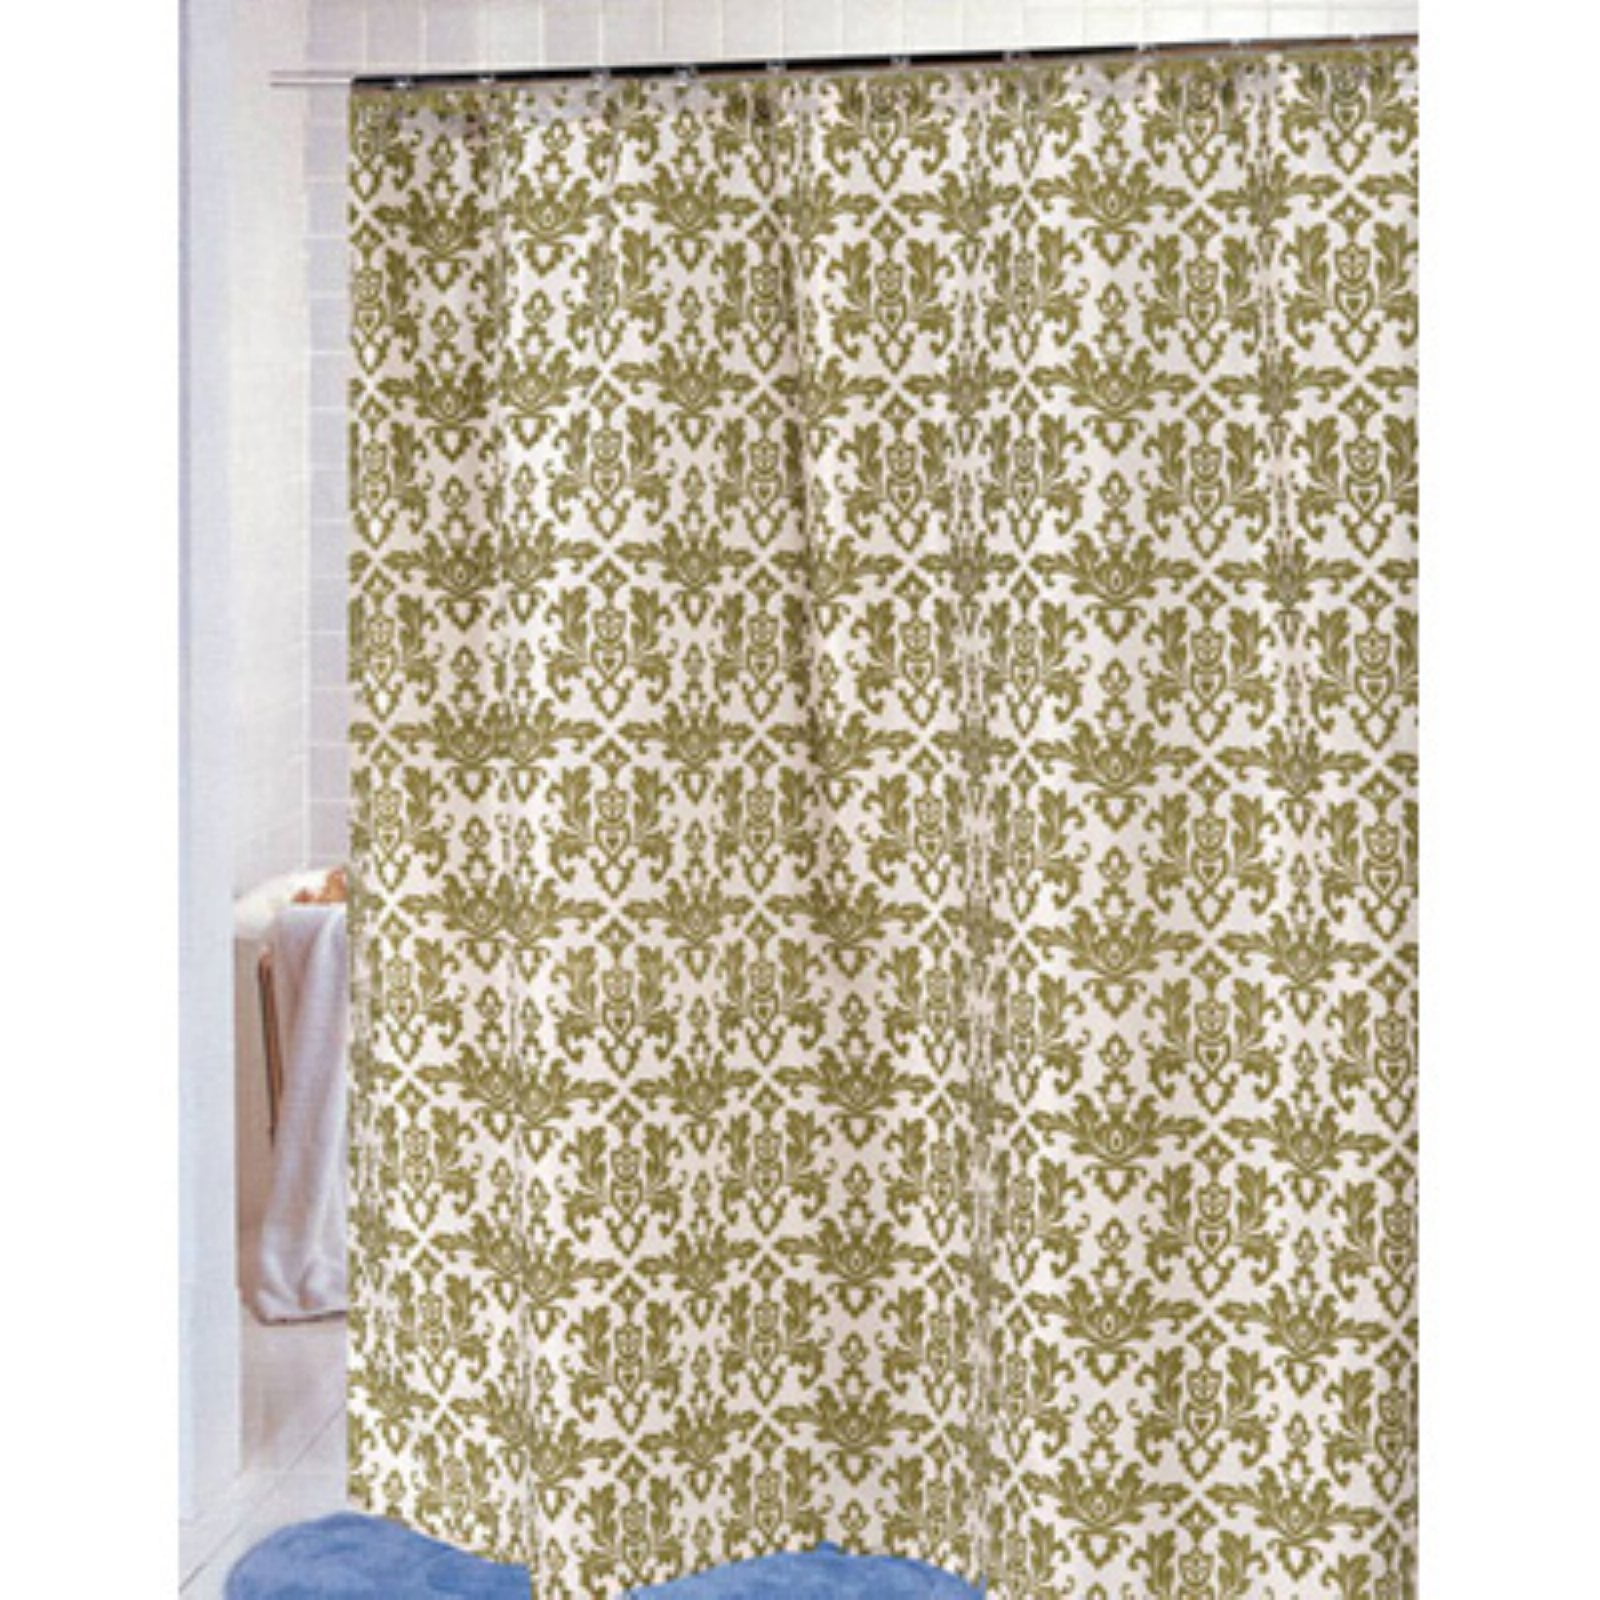 Carnation Home Fashions Damask Fabric Shower Curtain Chocolate on Blue